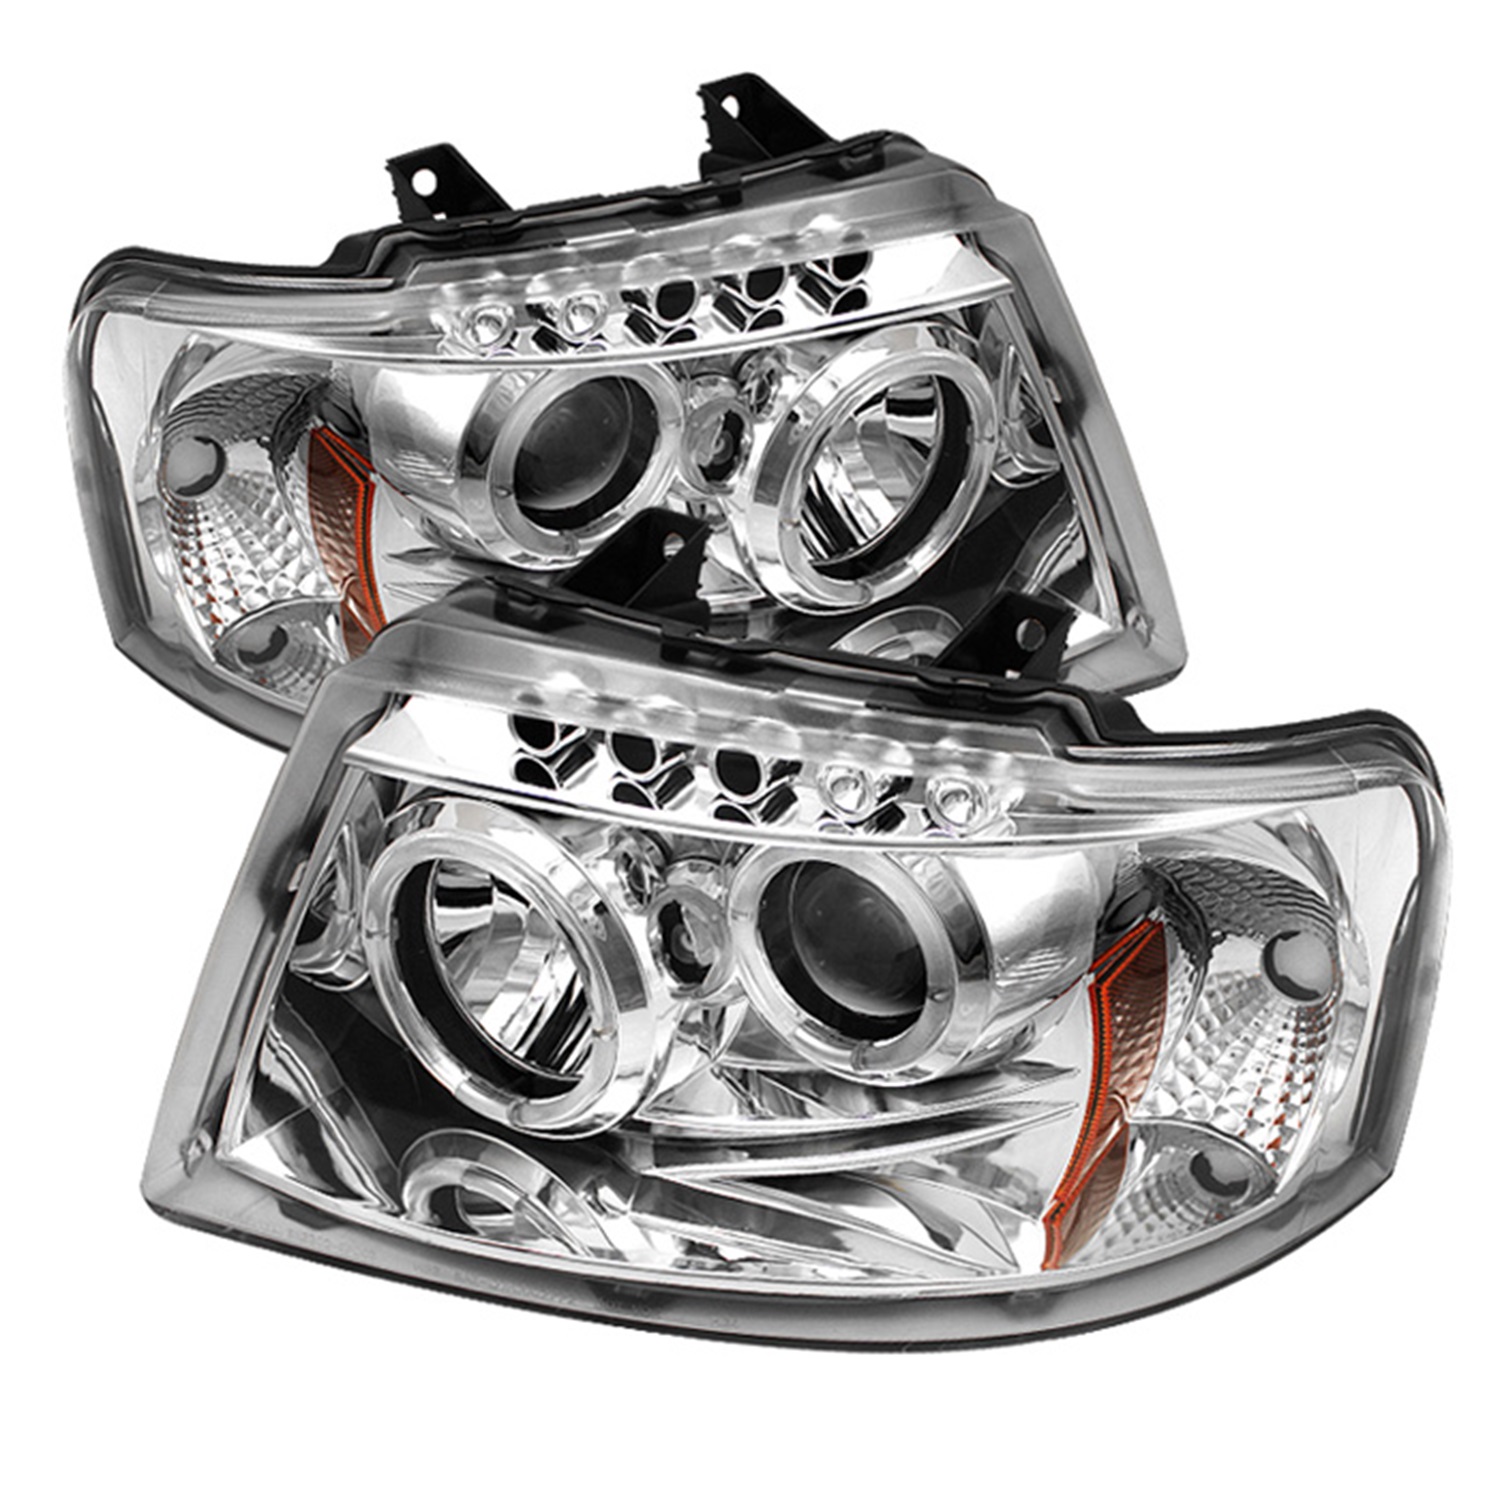 Spyder Auto Spyder Auto 5010124 Halo LED Projector Headlights Fits 03-06 Expedition